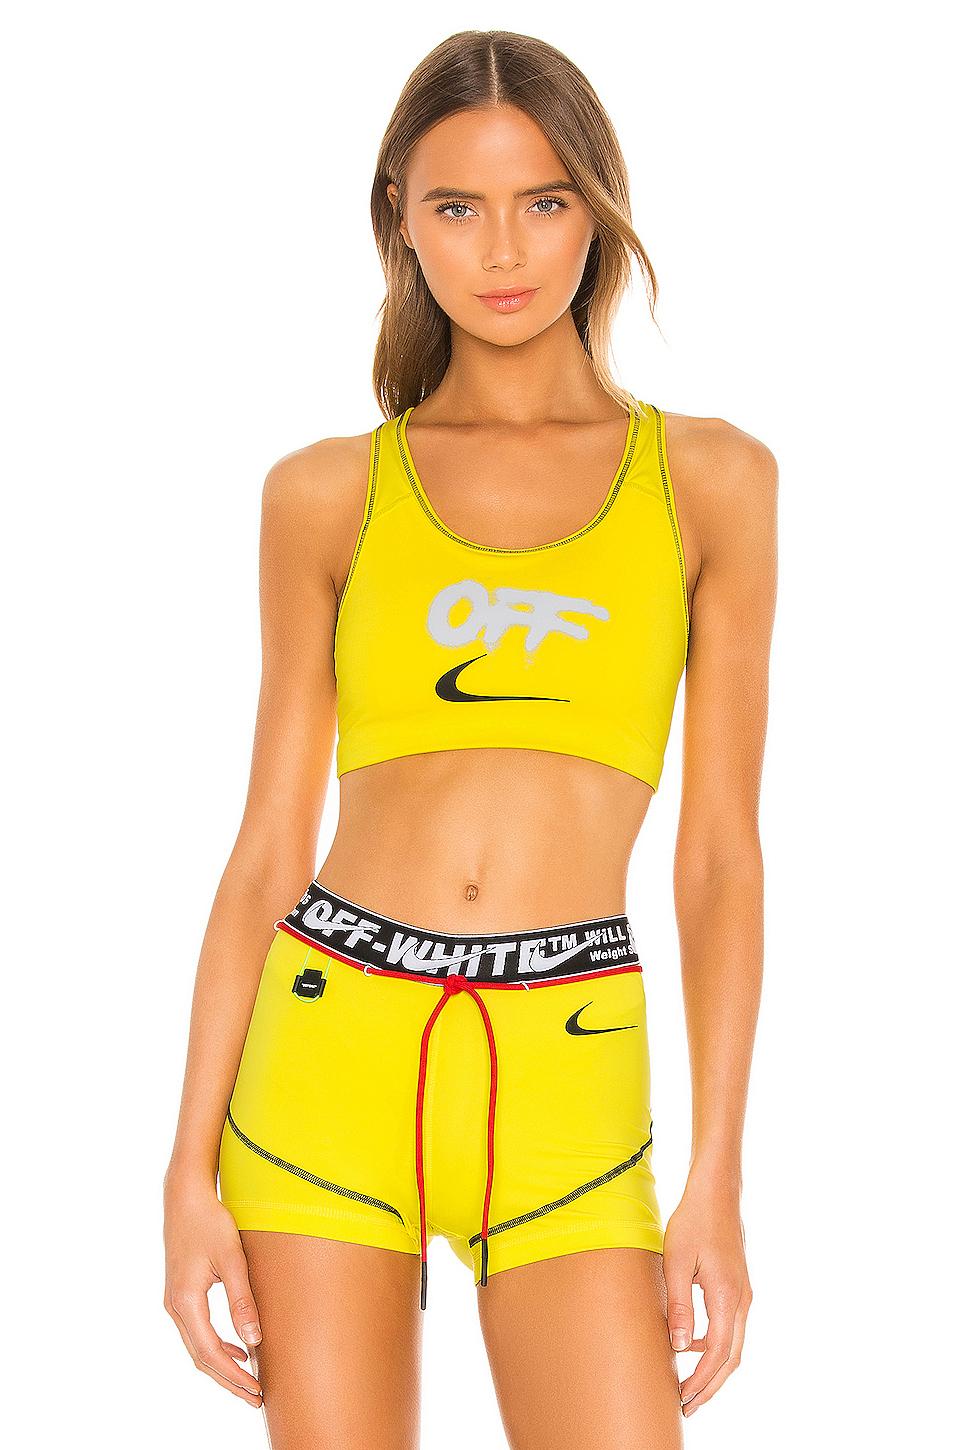 Nike Pro Women Classic Med Support Sports Bra 650831 Yellow Size S